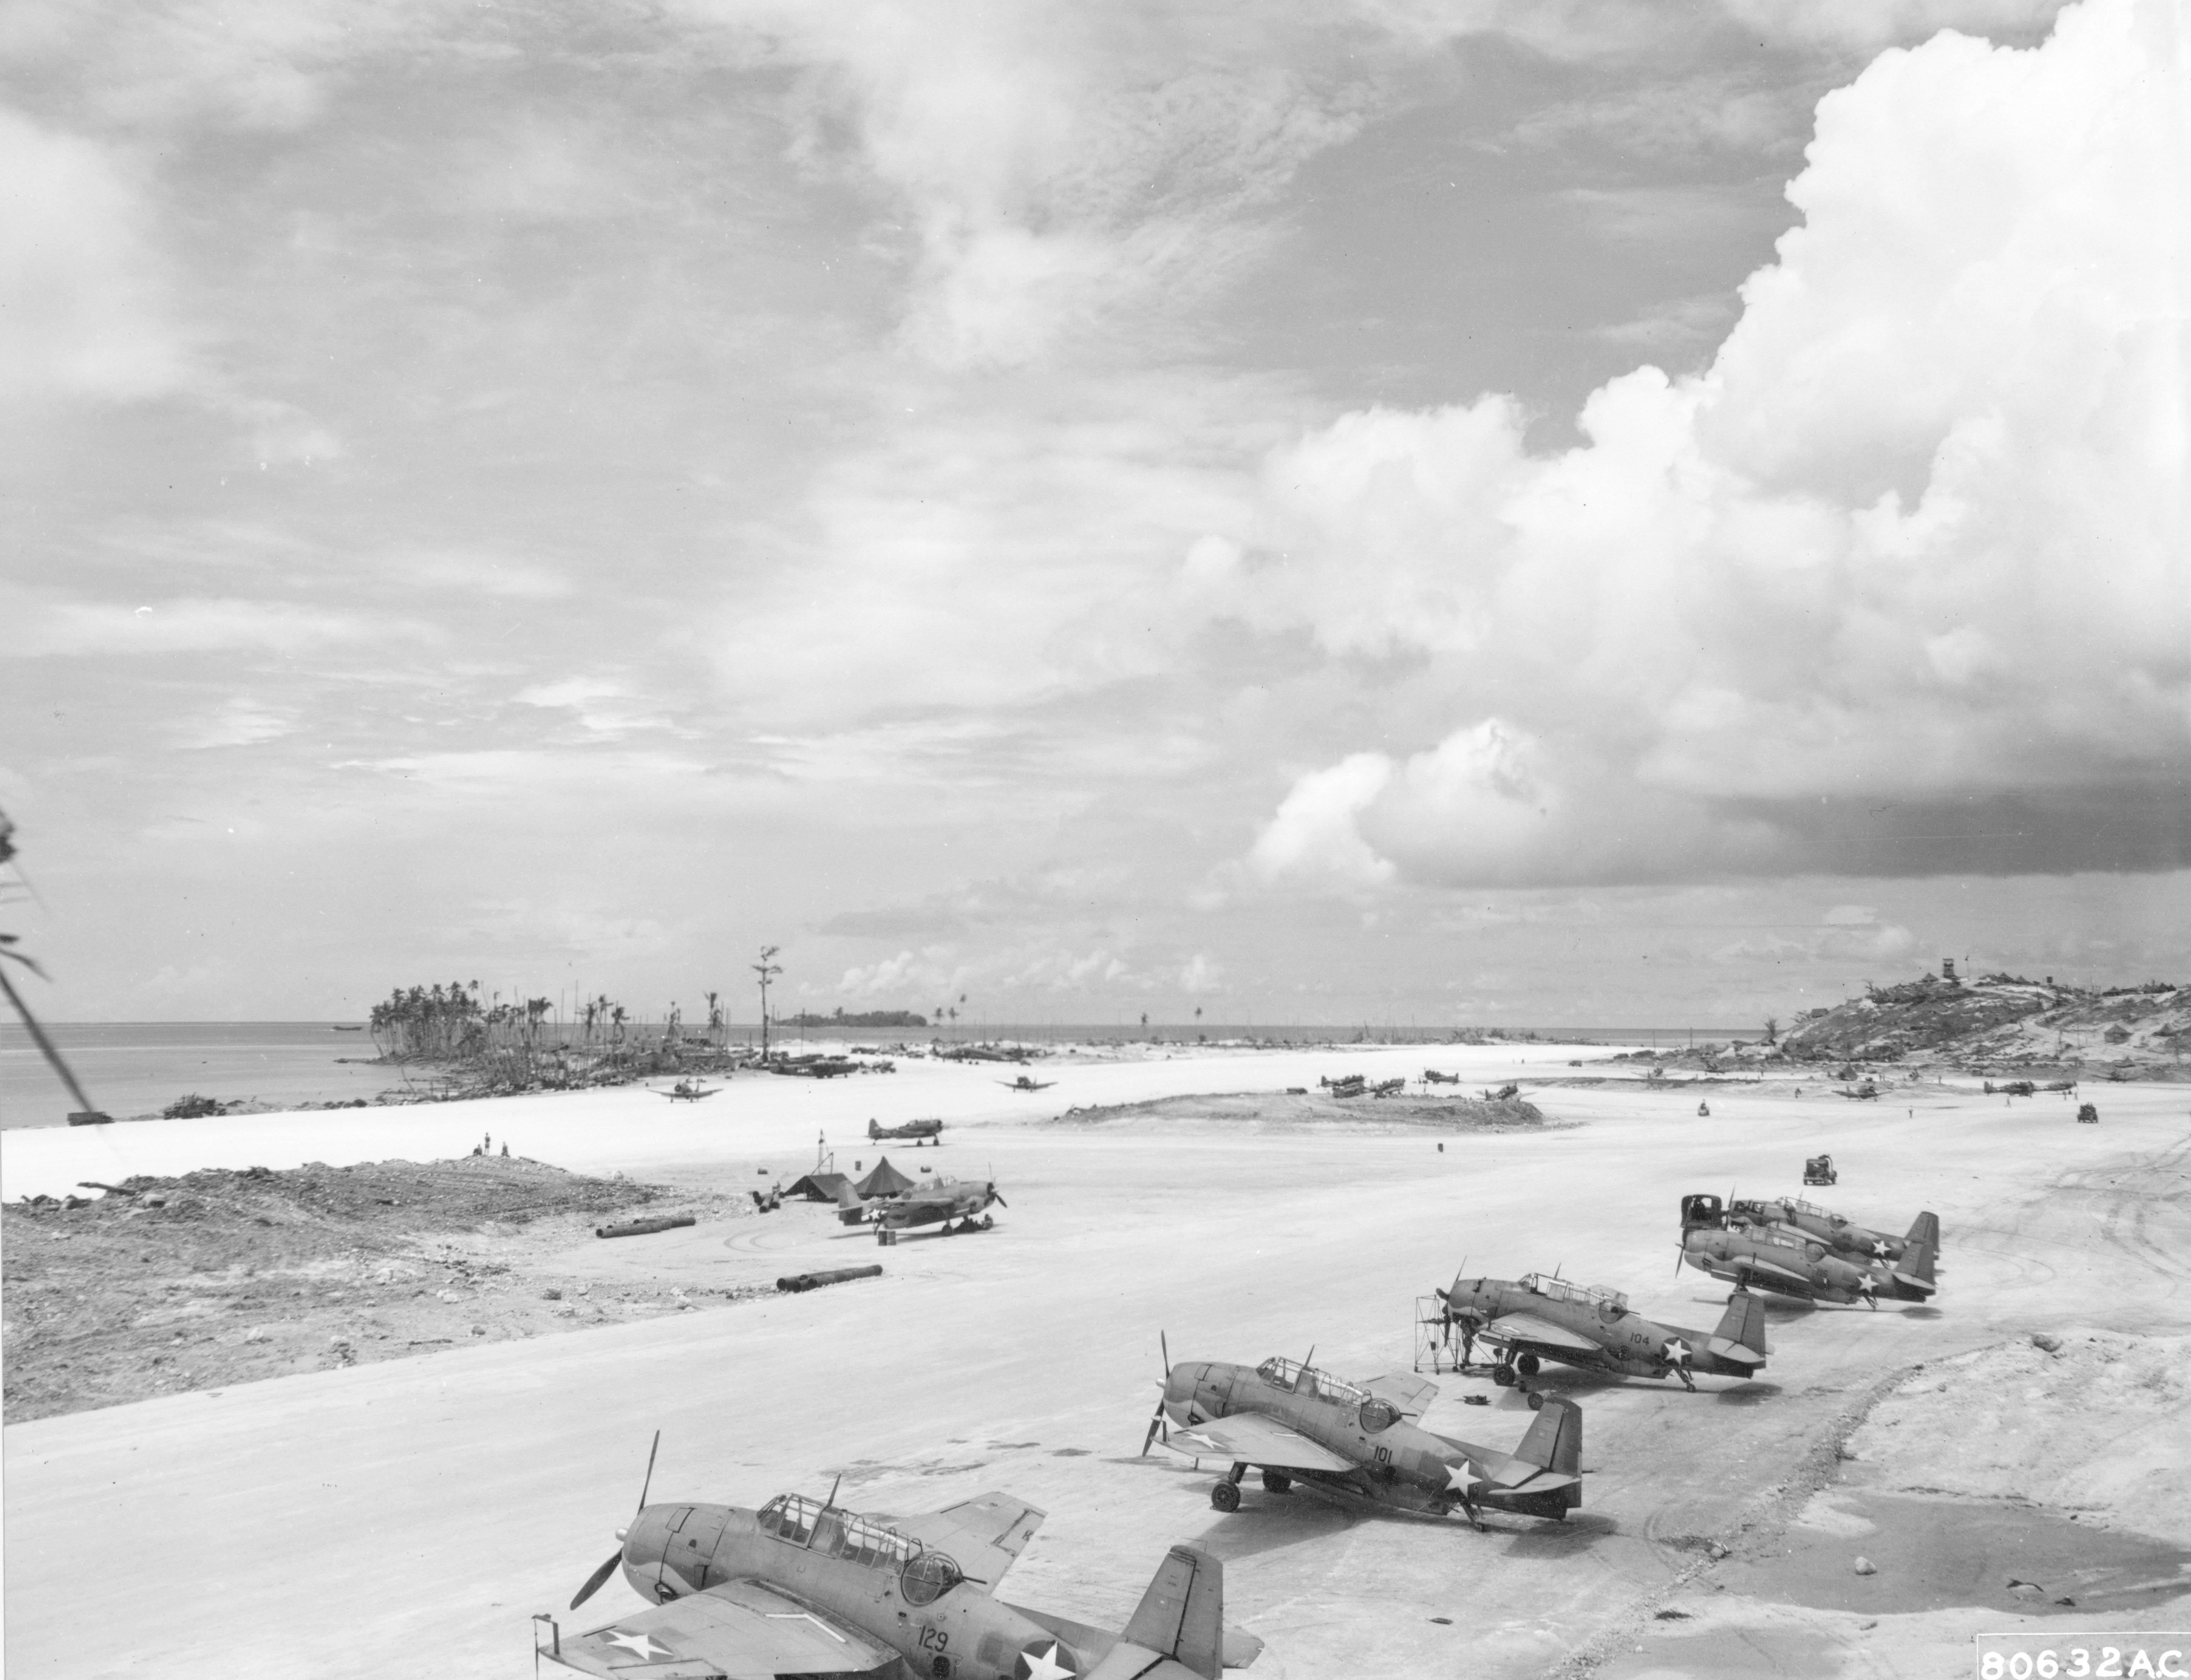 Navy TBF-1 Avengers at the Munda Airstrip, New Georgia, Solomons, Sept 1943. Note the crews are in the process of applying the newly updated National Insignia with white bars and a blue border.